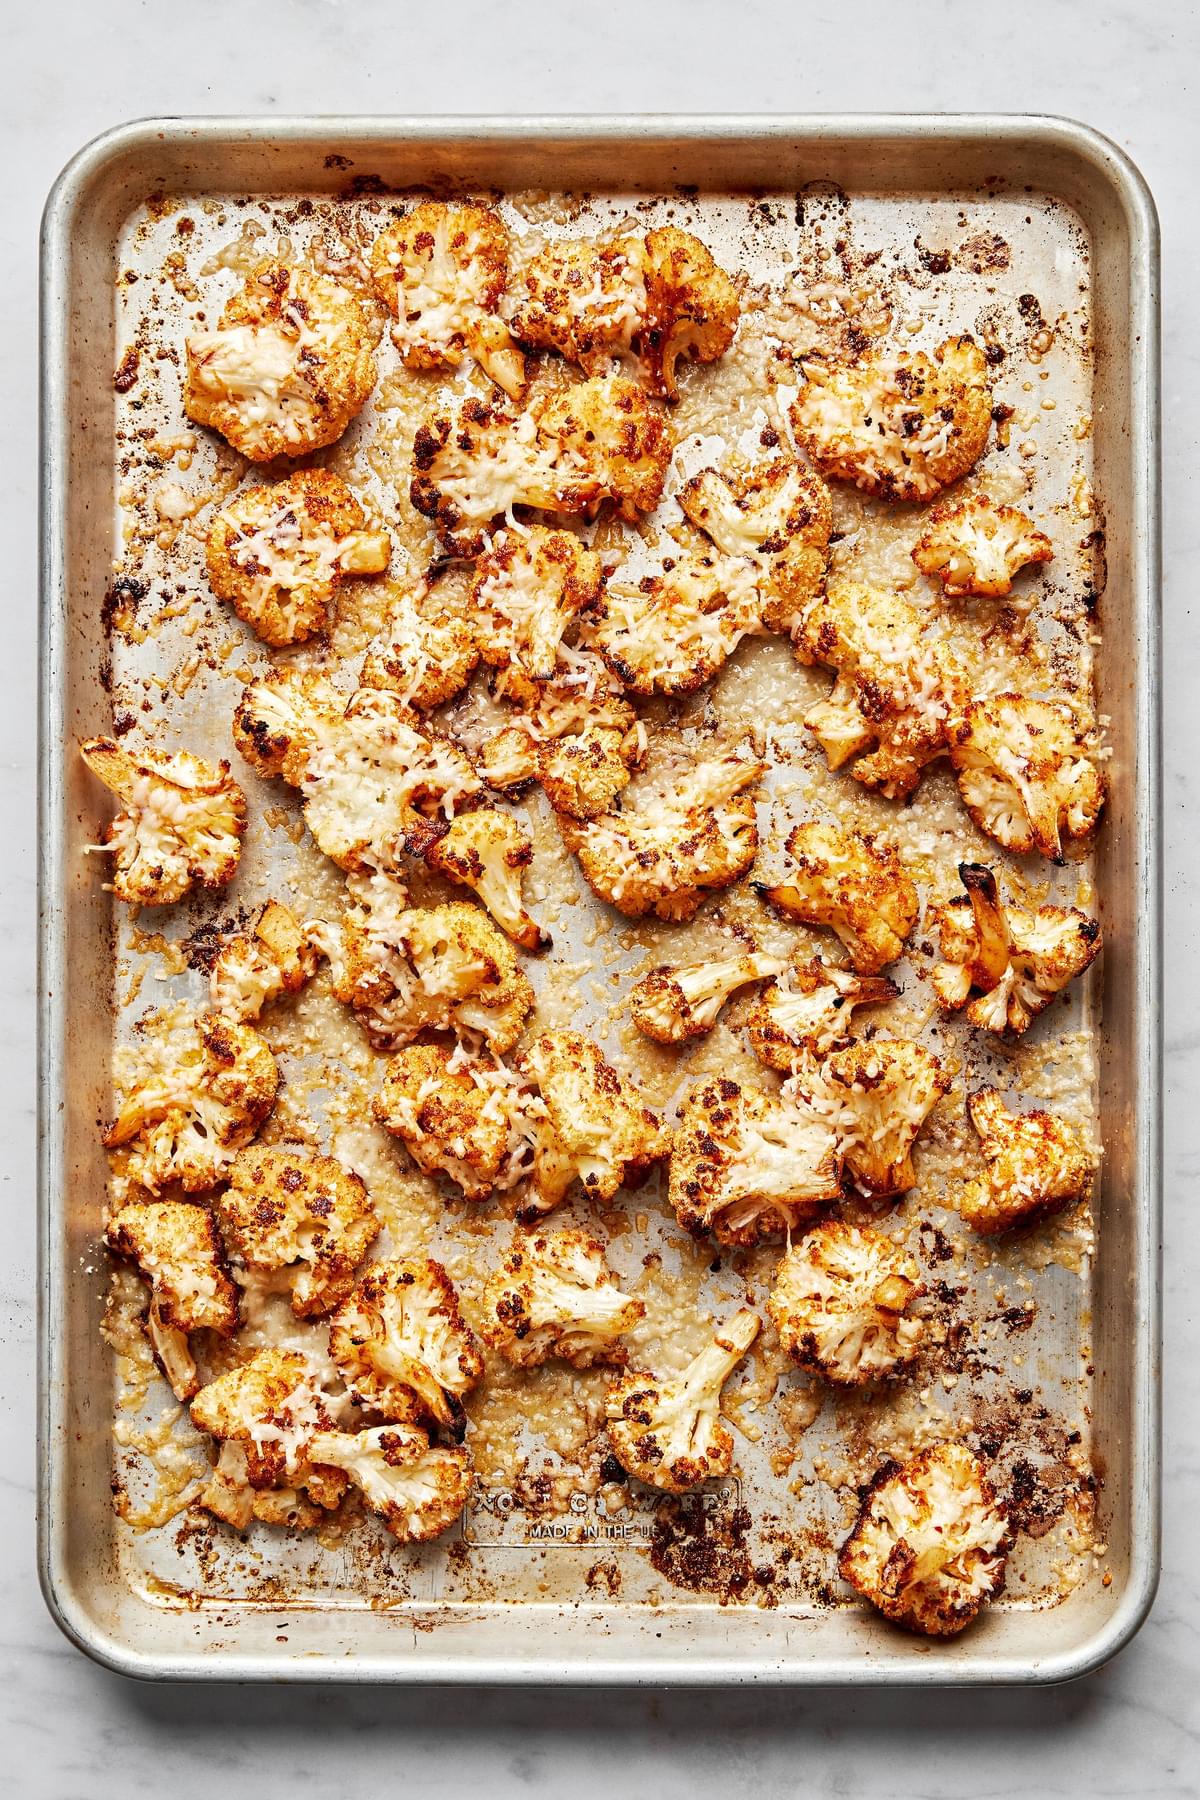 roasted cauliflower florets seasoned with salt, garlic powder, smoked paprika & red pepper flakes sprinkled with parmesan